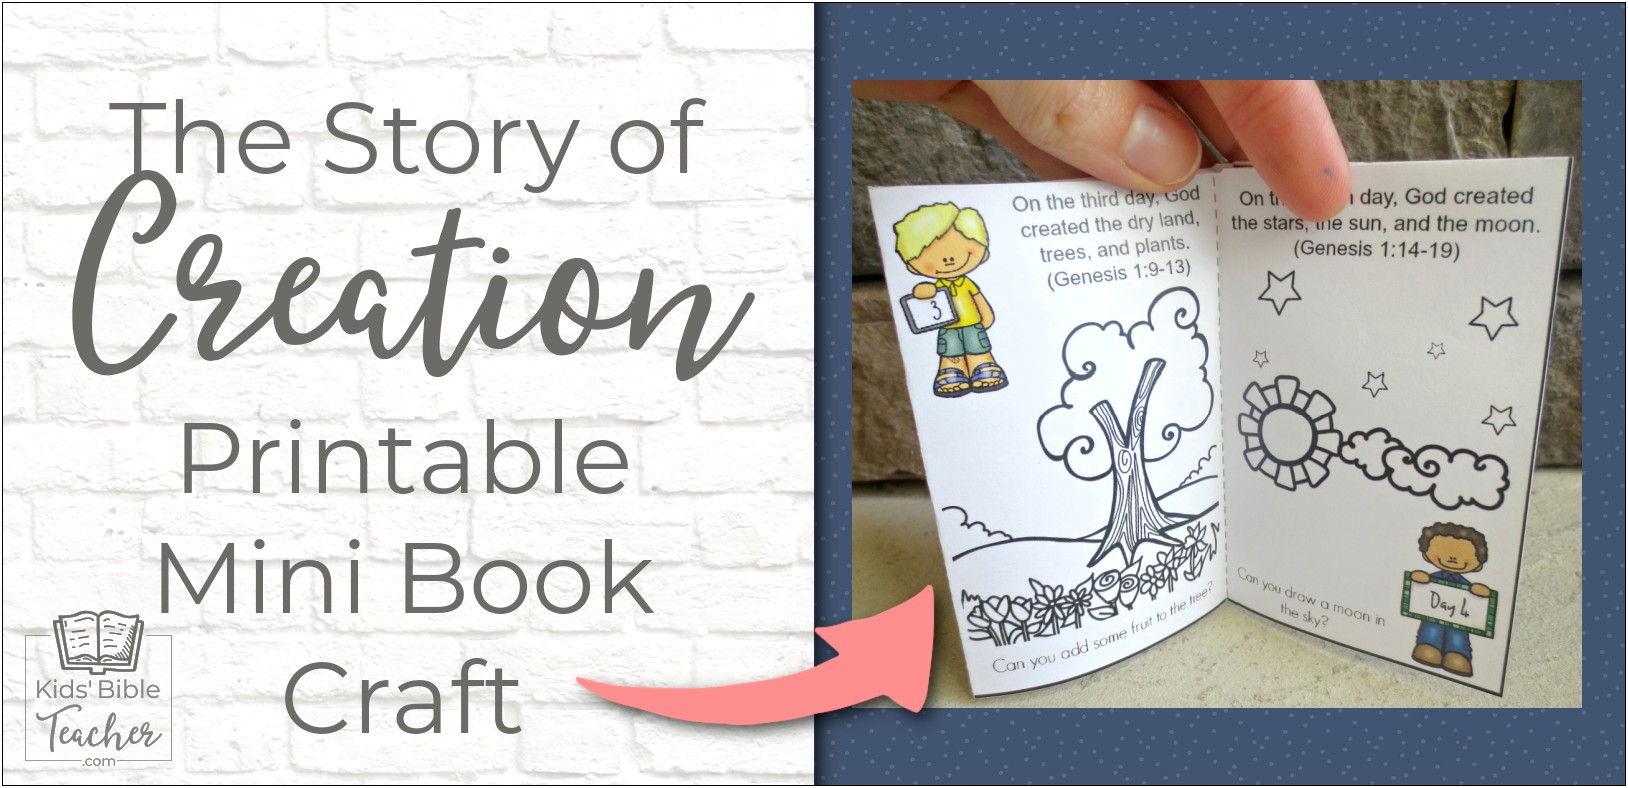 Free Bible Crafts For Kids Templates